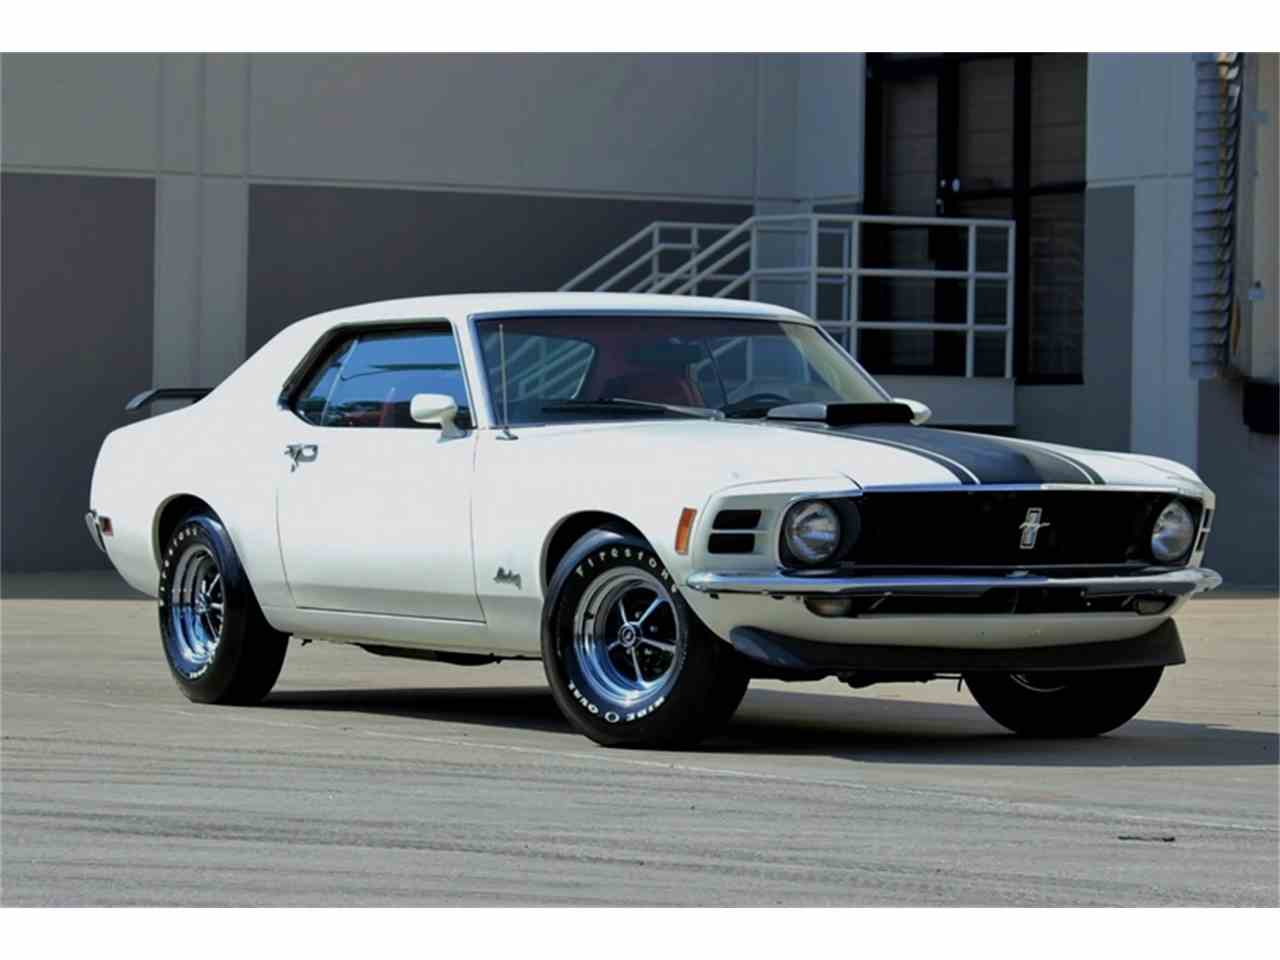 1970 Ford Mustang M code 351 Cleveland 4spd AC for Sale | ClassicCars ...